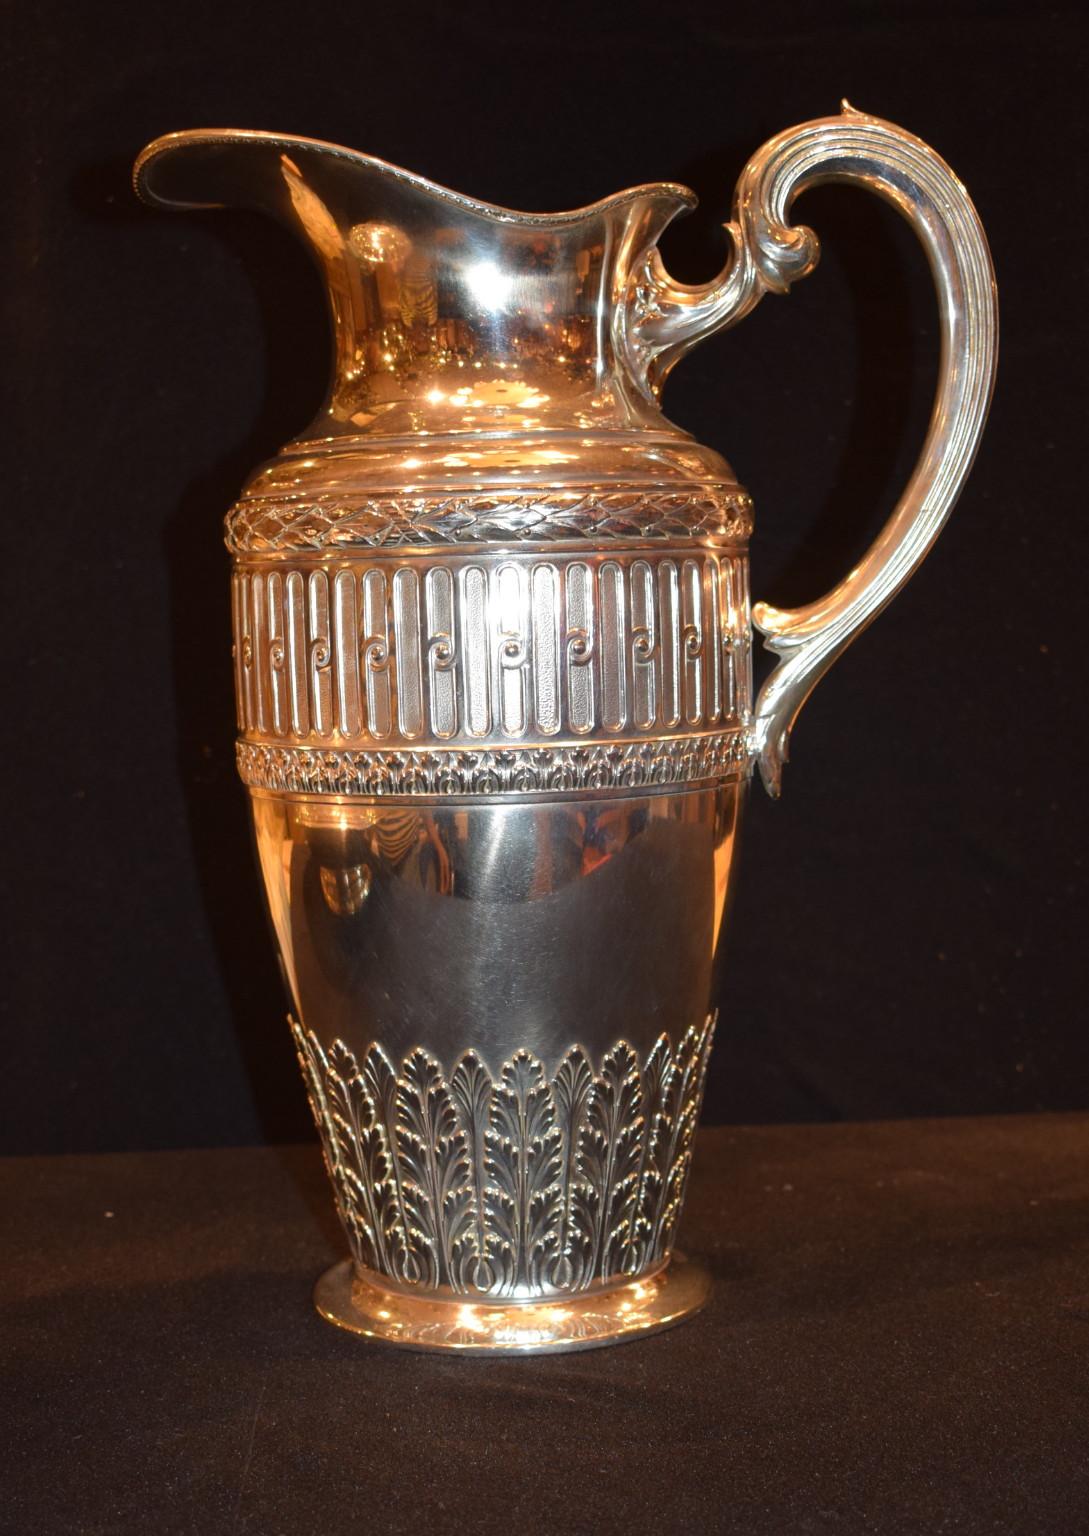 Late 19th century silver over bronze bowl and pitcher set in a neoclassical Adams style 
The pitcher is 14.5 inches tall. The bowl is 17.75 inches diameter.
 